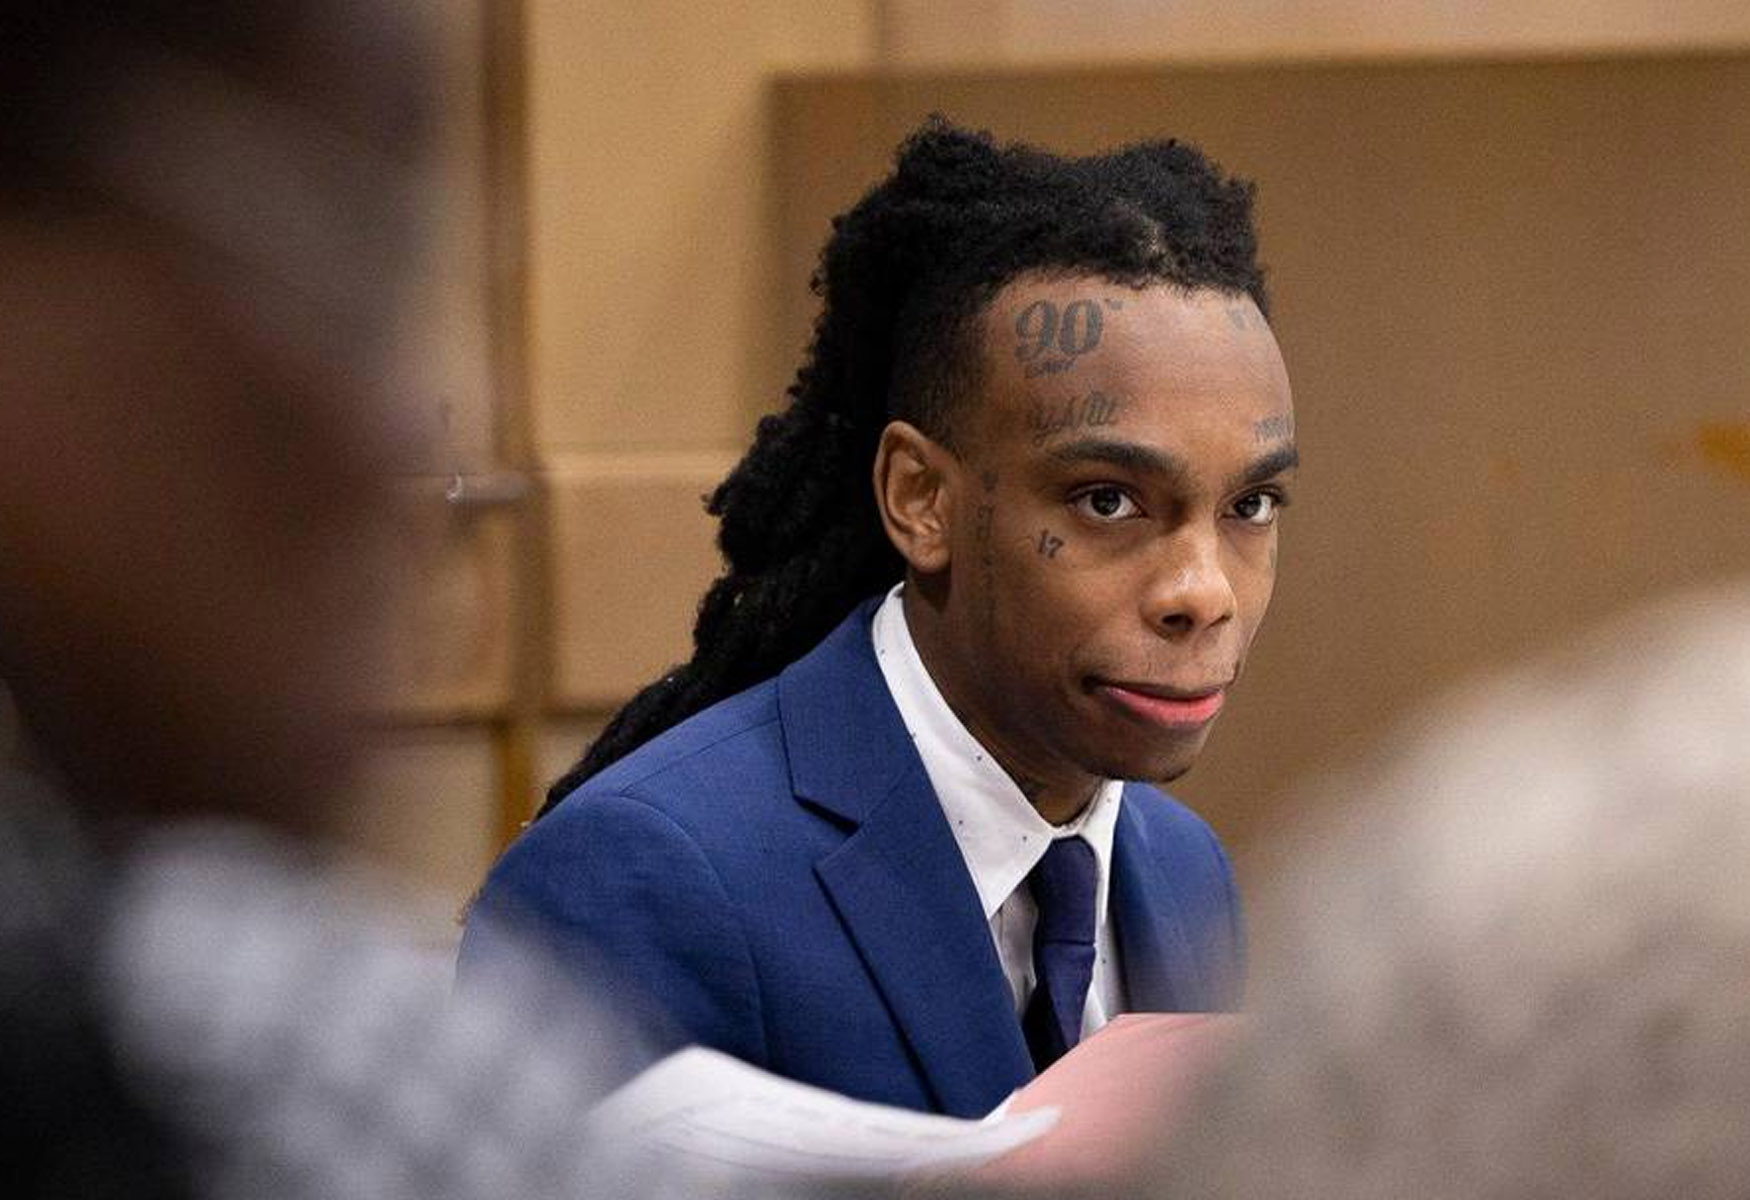 ynw-melly-allegedly-used-rihanna-code-name-to-tamper-with-witnesses-officials-claim